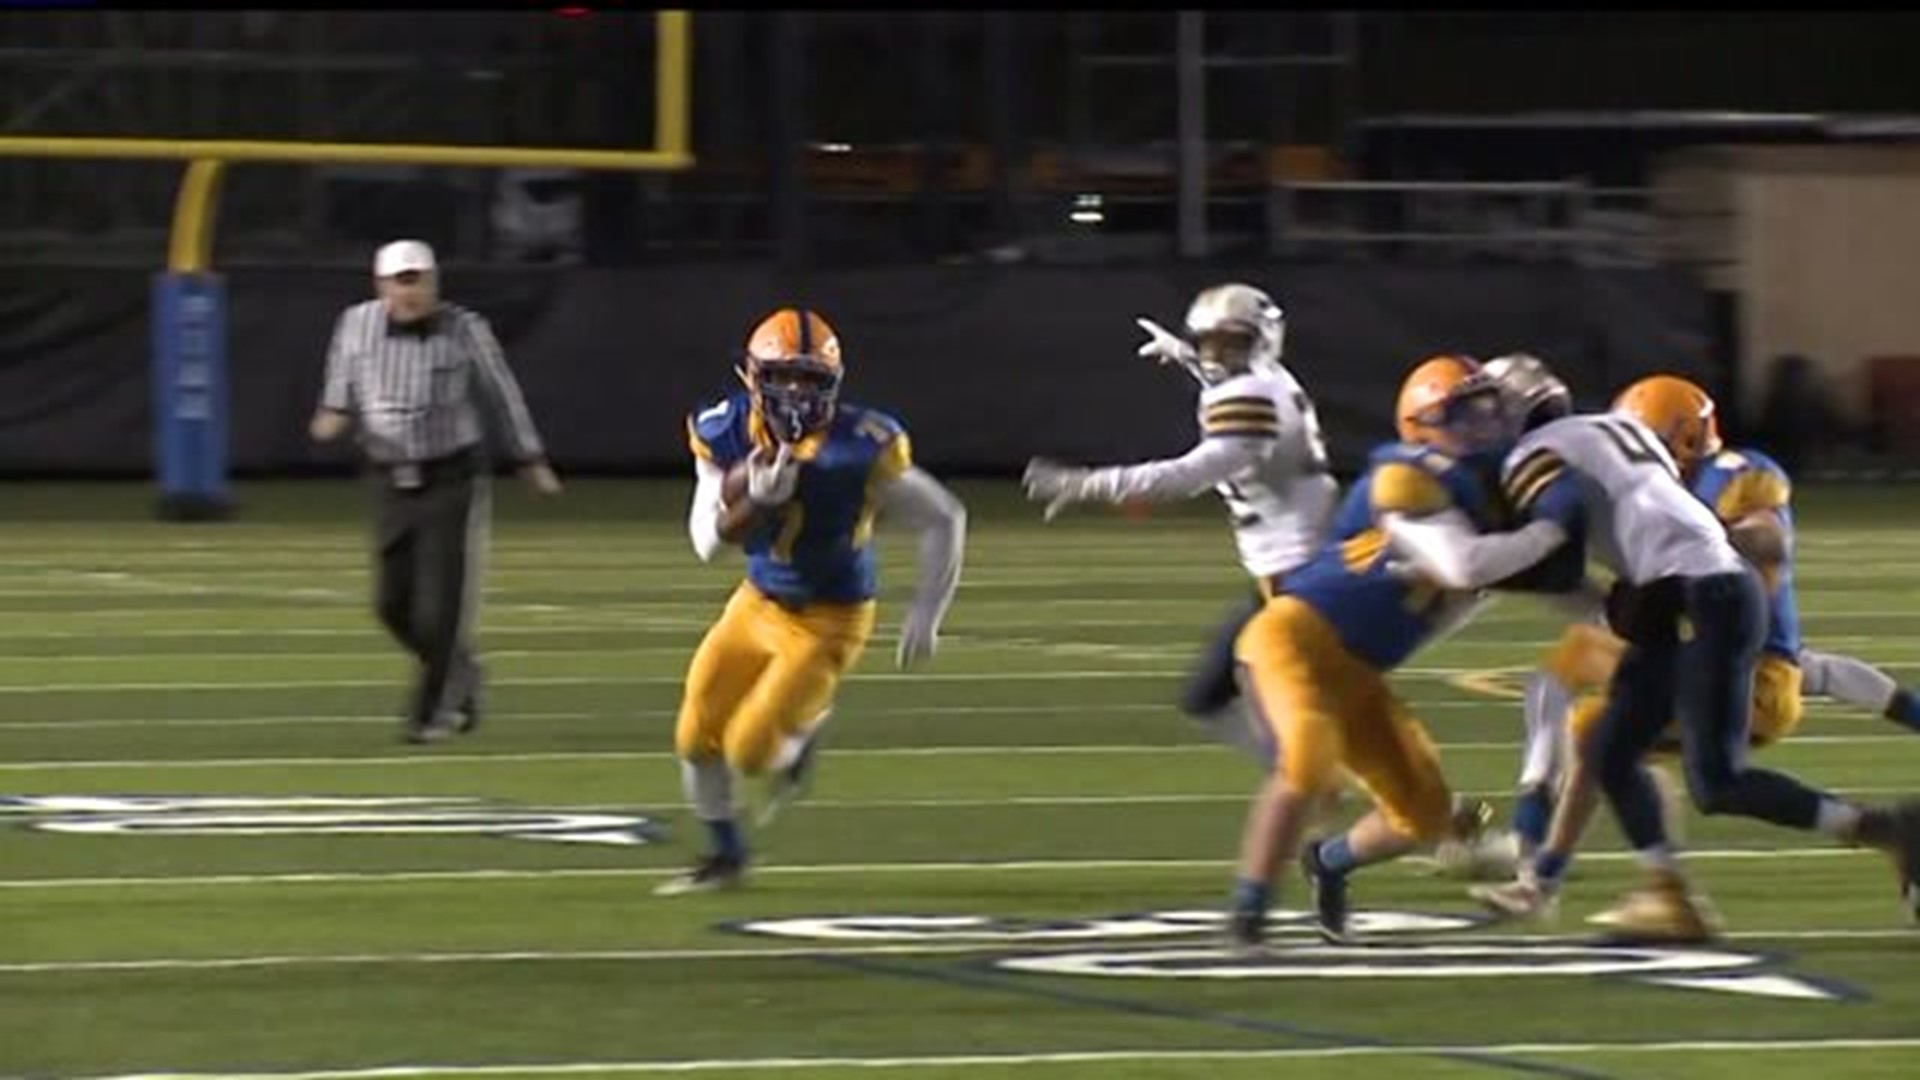 HSFF State Semi-Finals Middletown vs Notre Dame-Green highlights